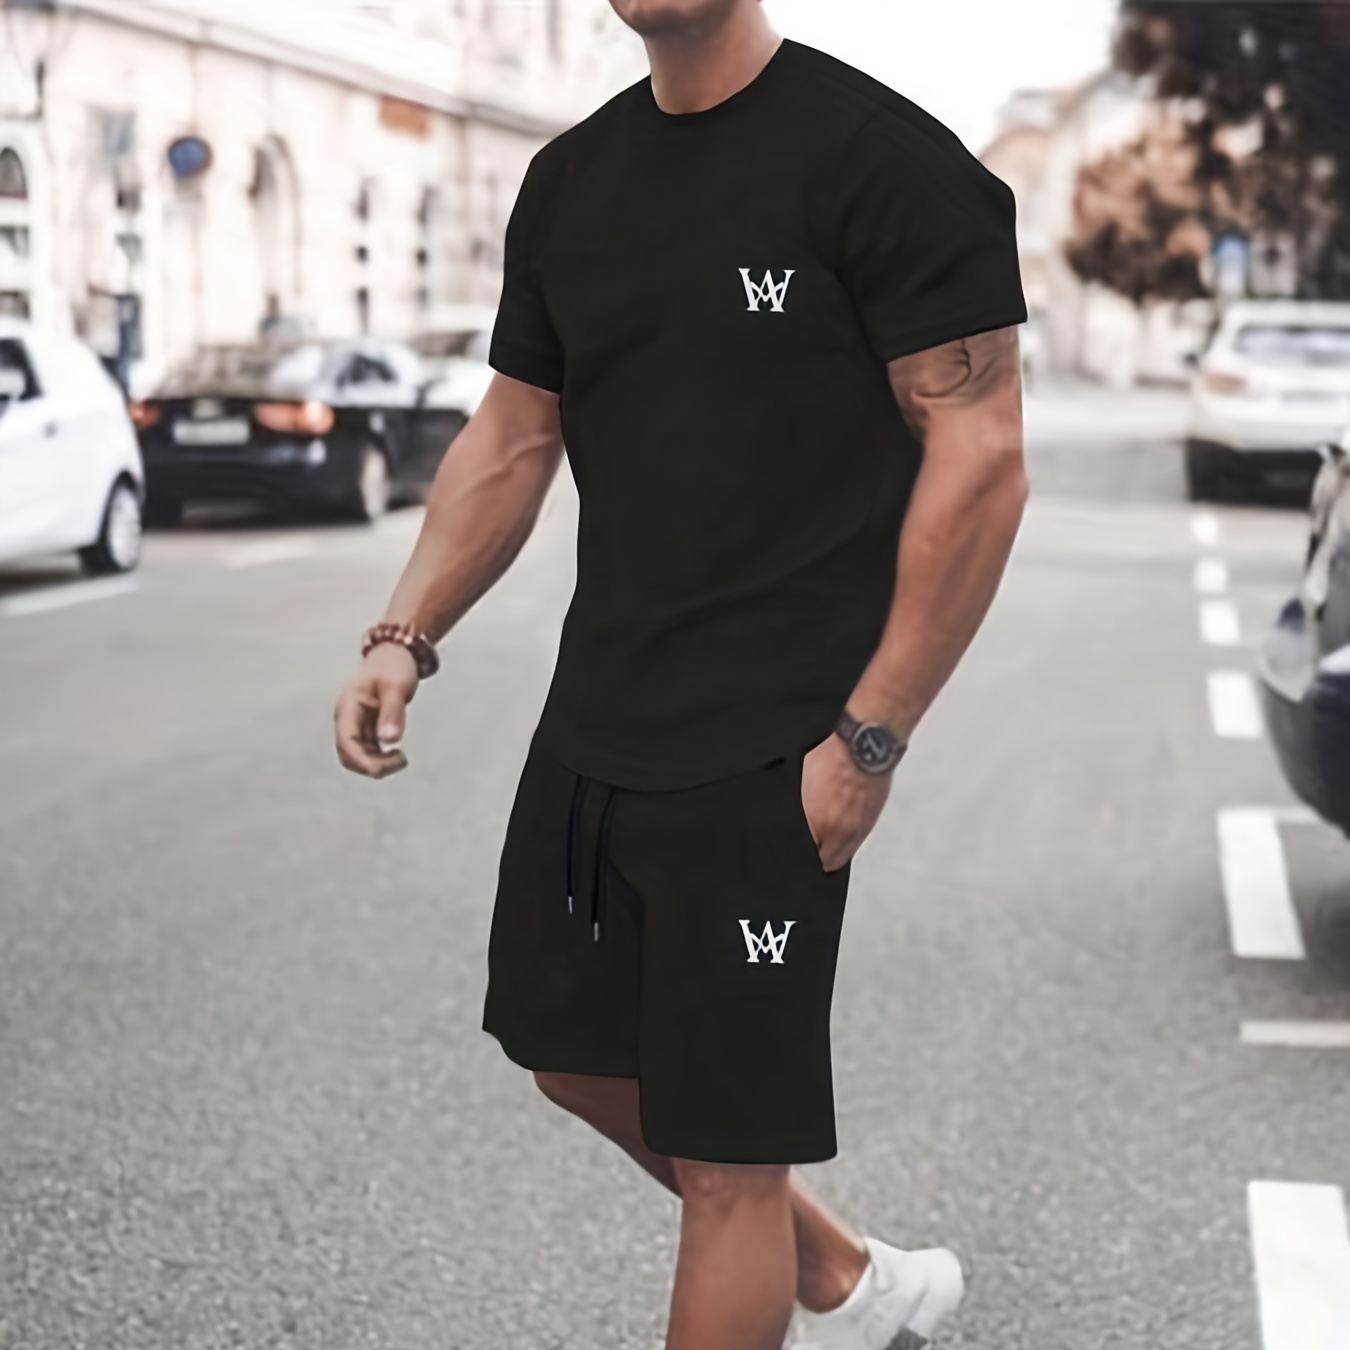 

Men's Casual W Letter Print Pajama Set For Summer, Crew Neck Short Sleeve Printed Graphic T-shirt Top & Drawstring Shorts With Pockets, Loungewear Set